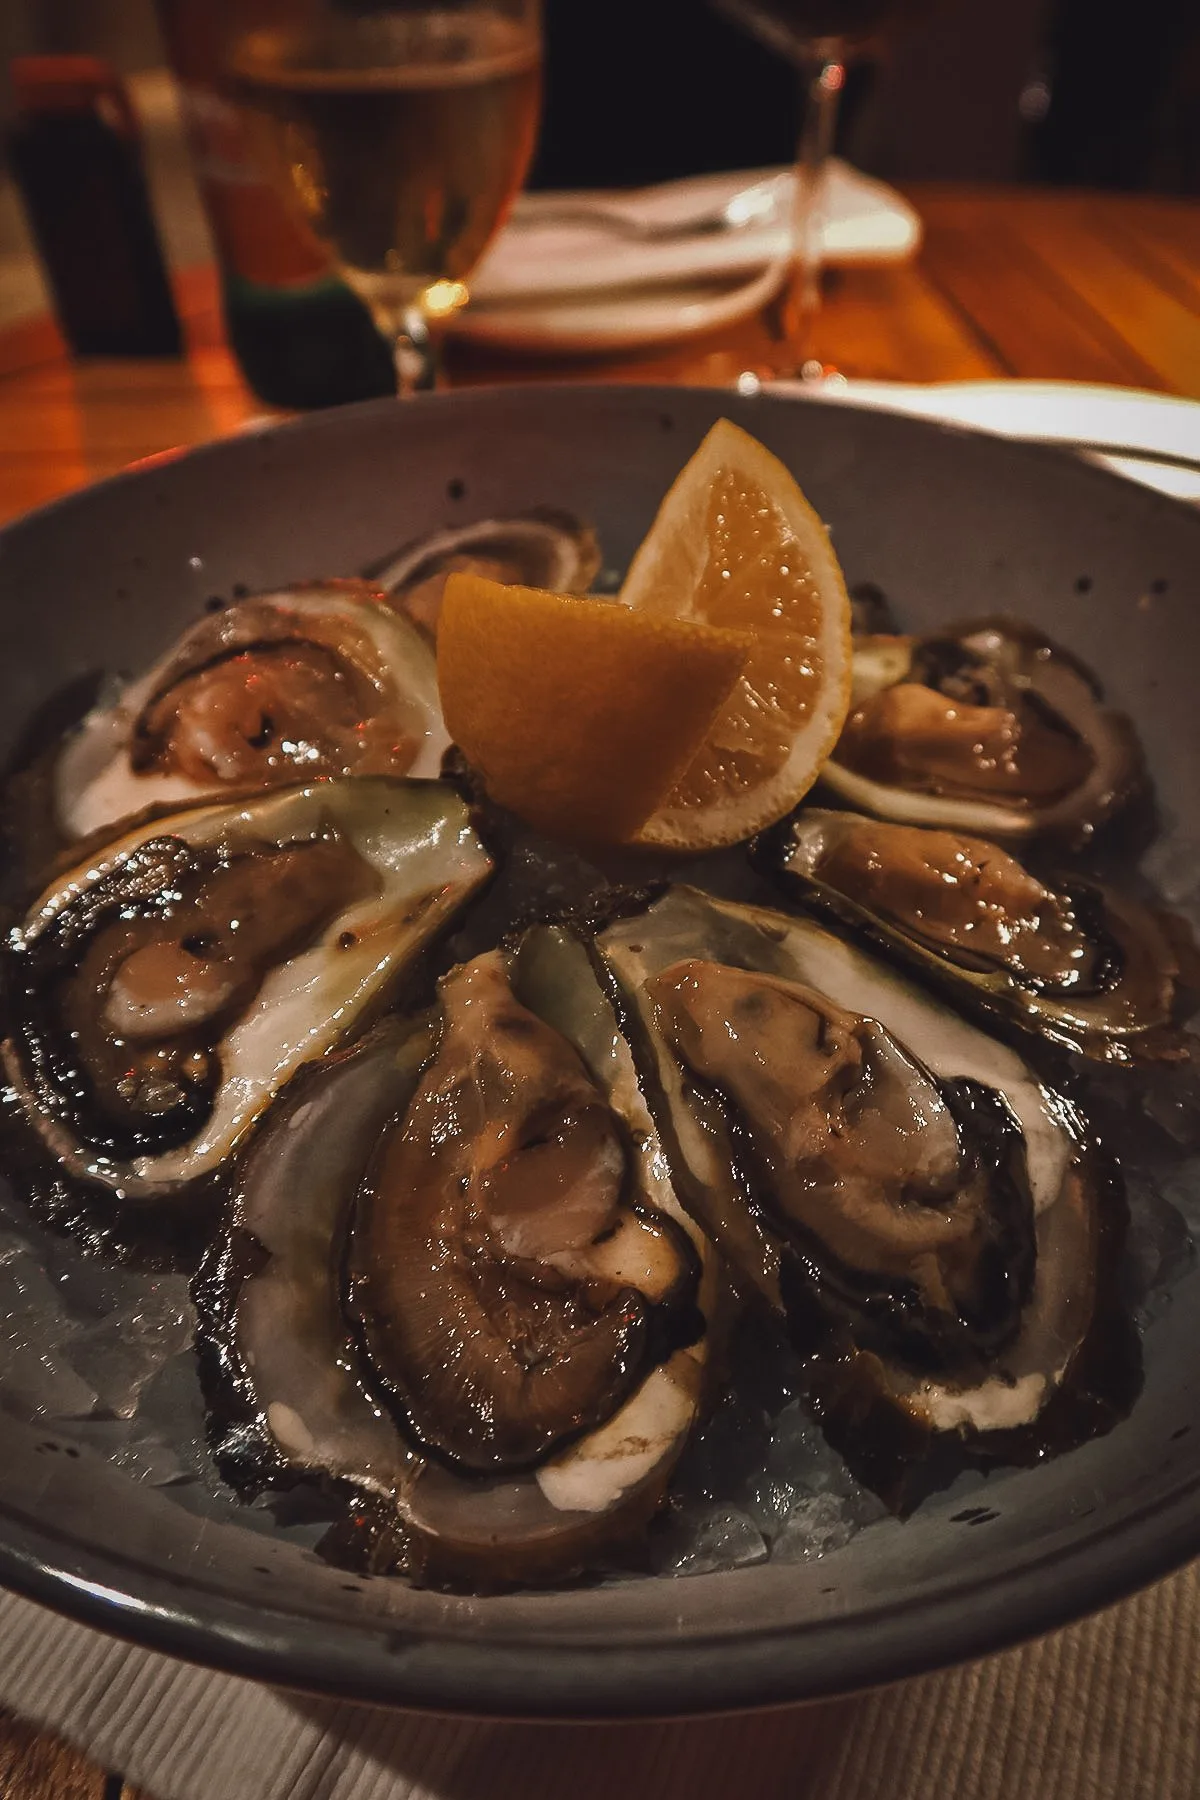 Mali Ston oysters at a restaurant in Dubrovnik